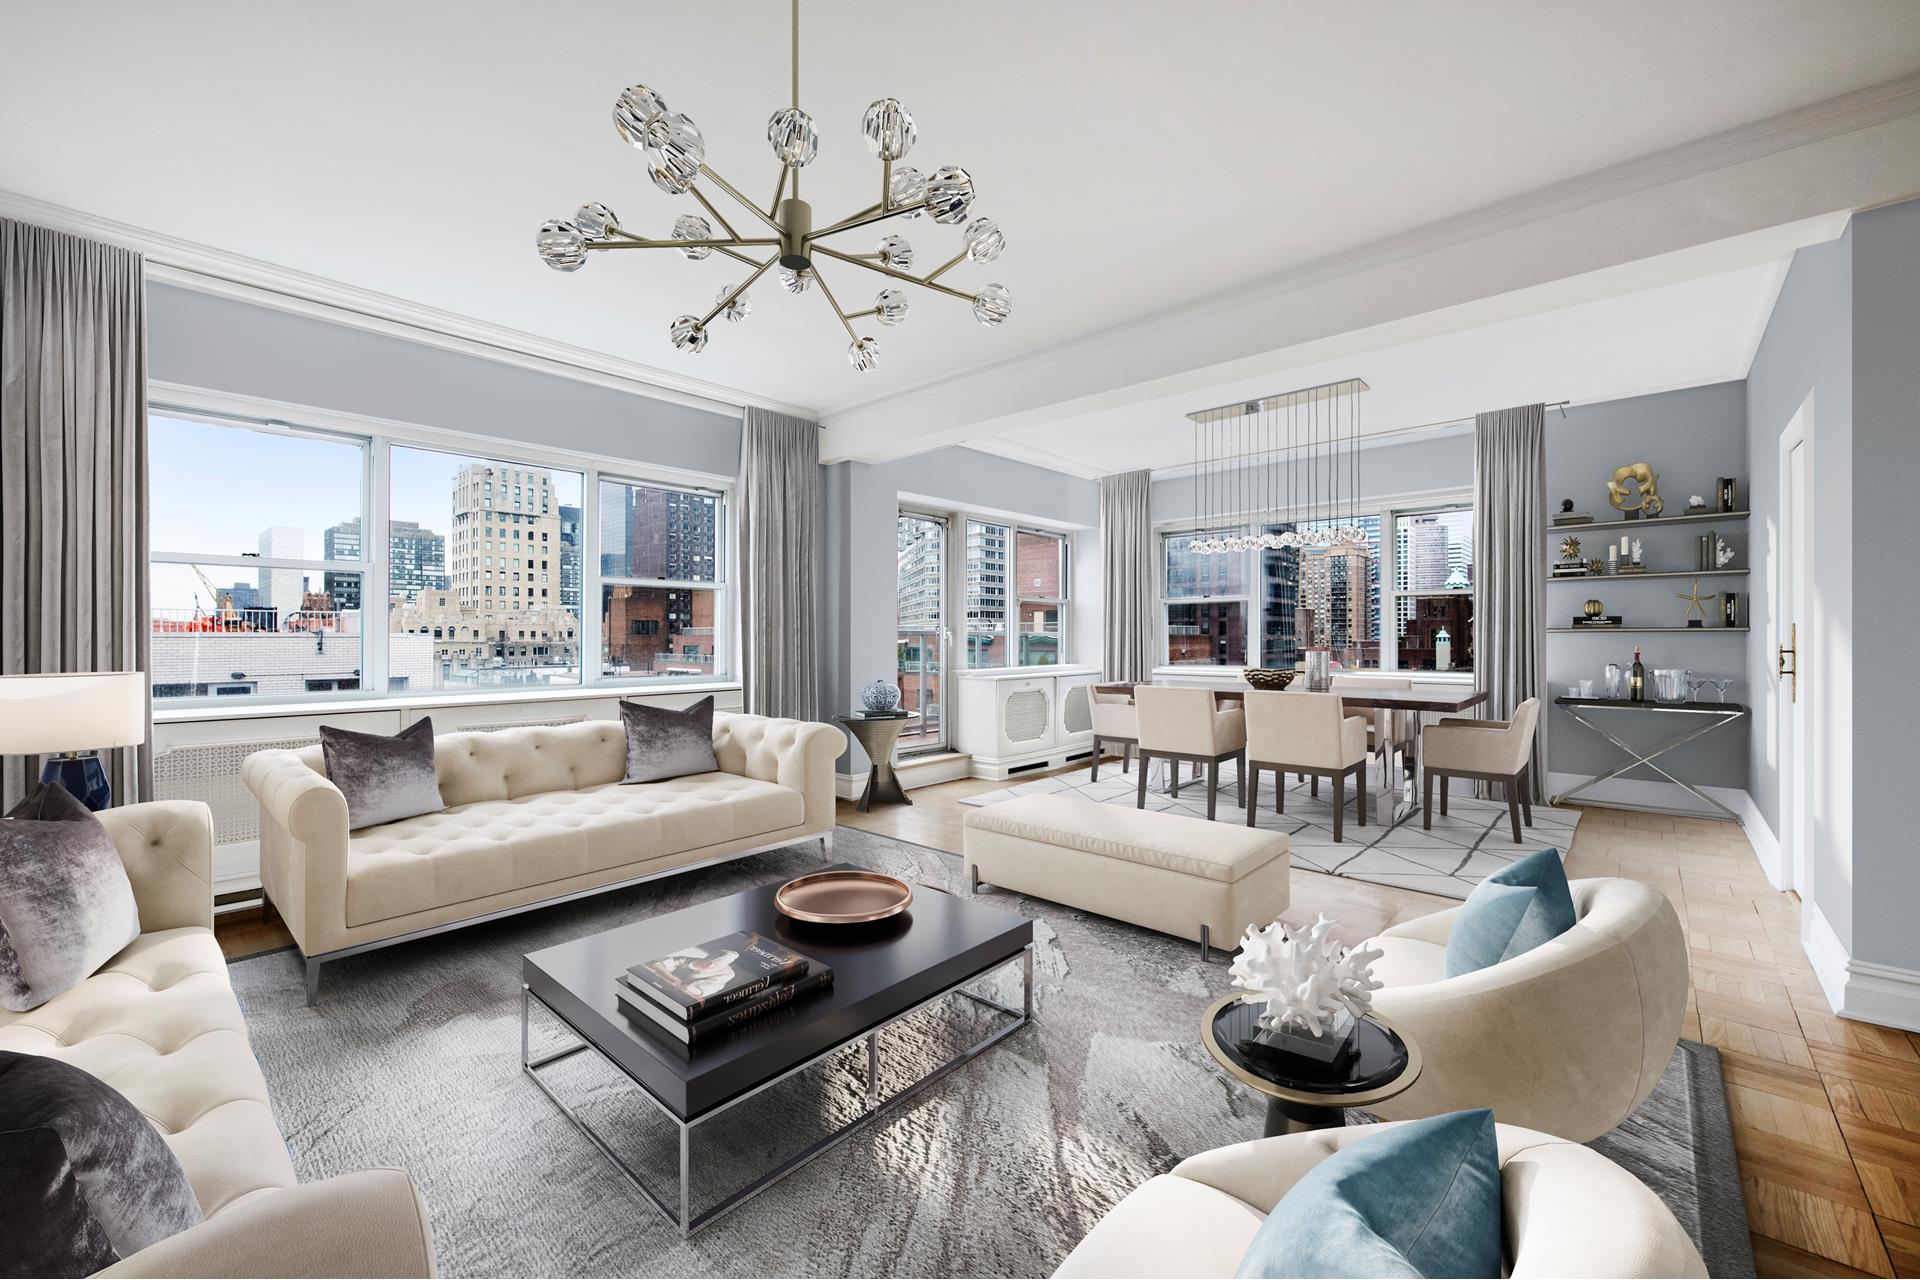 25 Sutton Place Php, Sutton, Midtown East, NYC - 2 Bedrooms  
2 Bathrooms  
5 Rooms - 